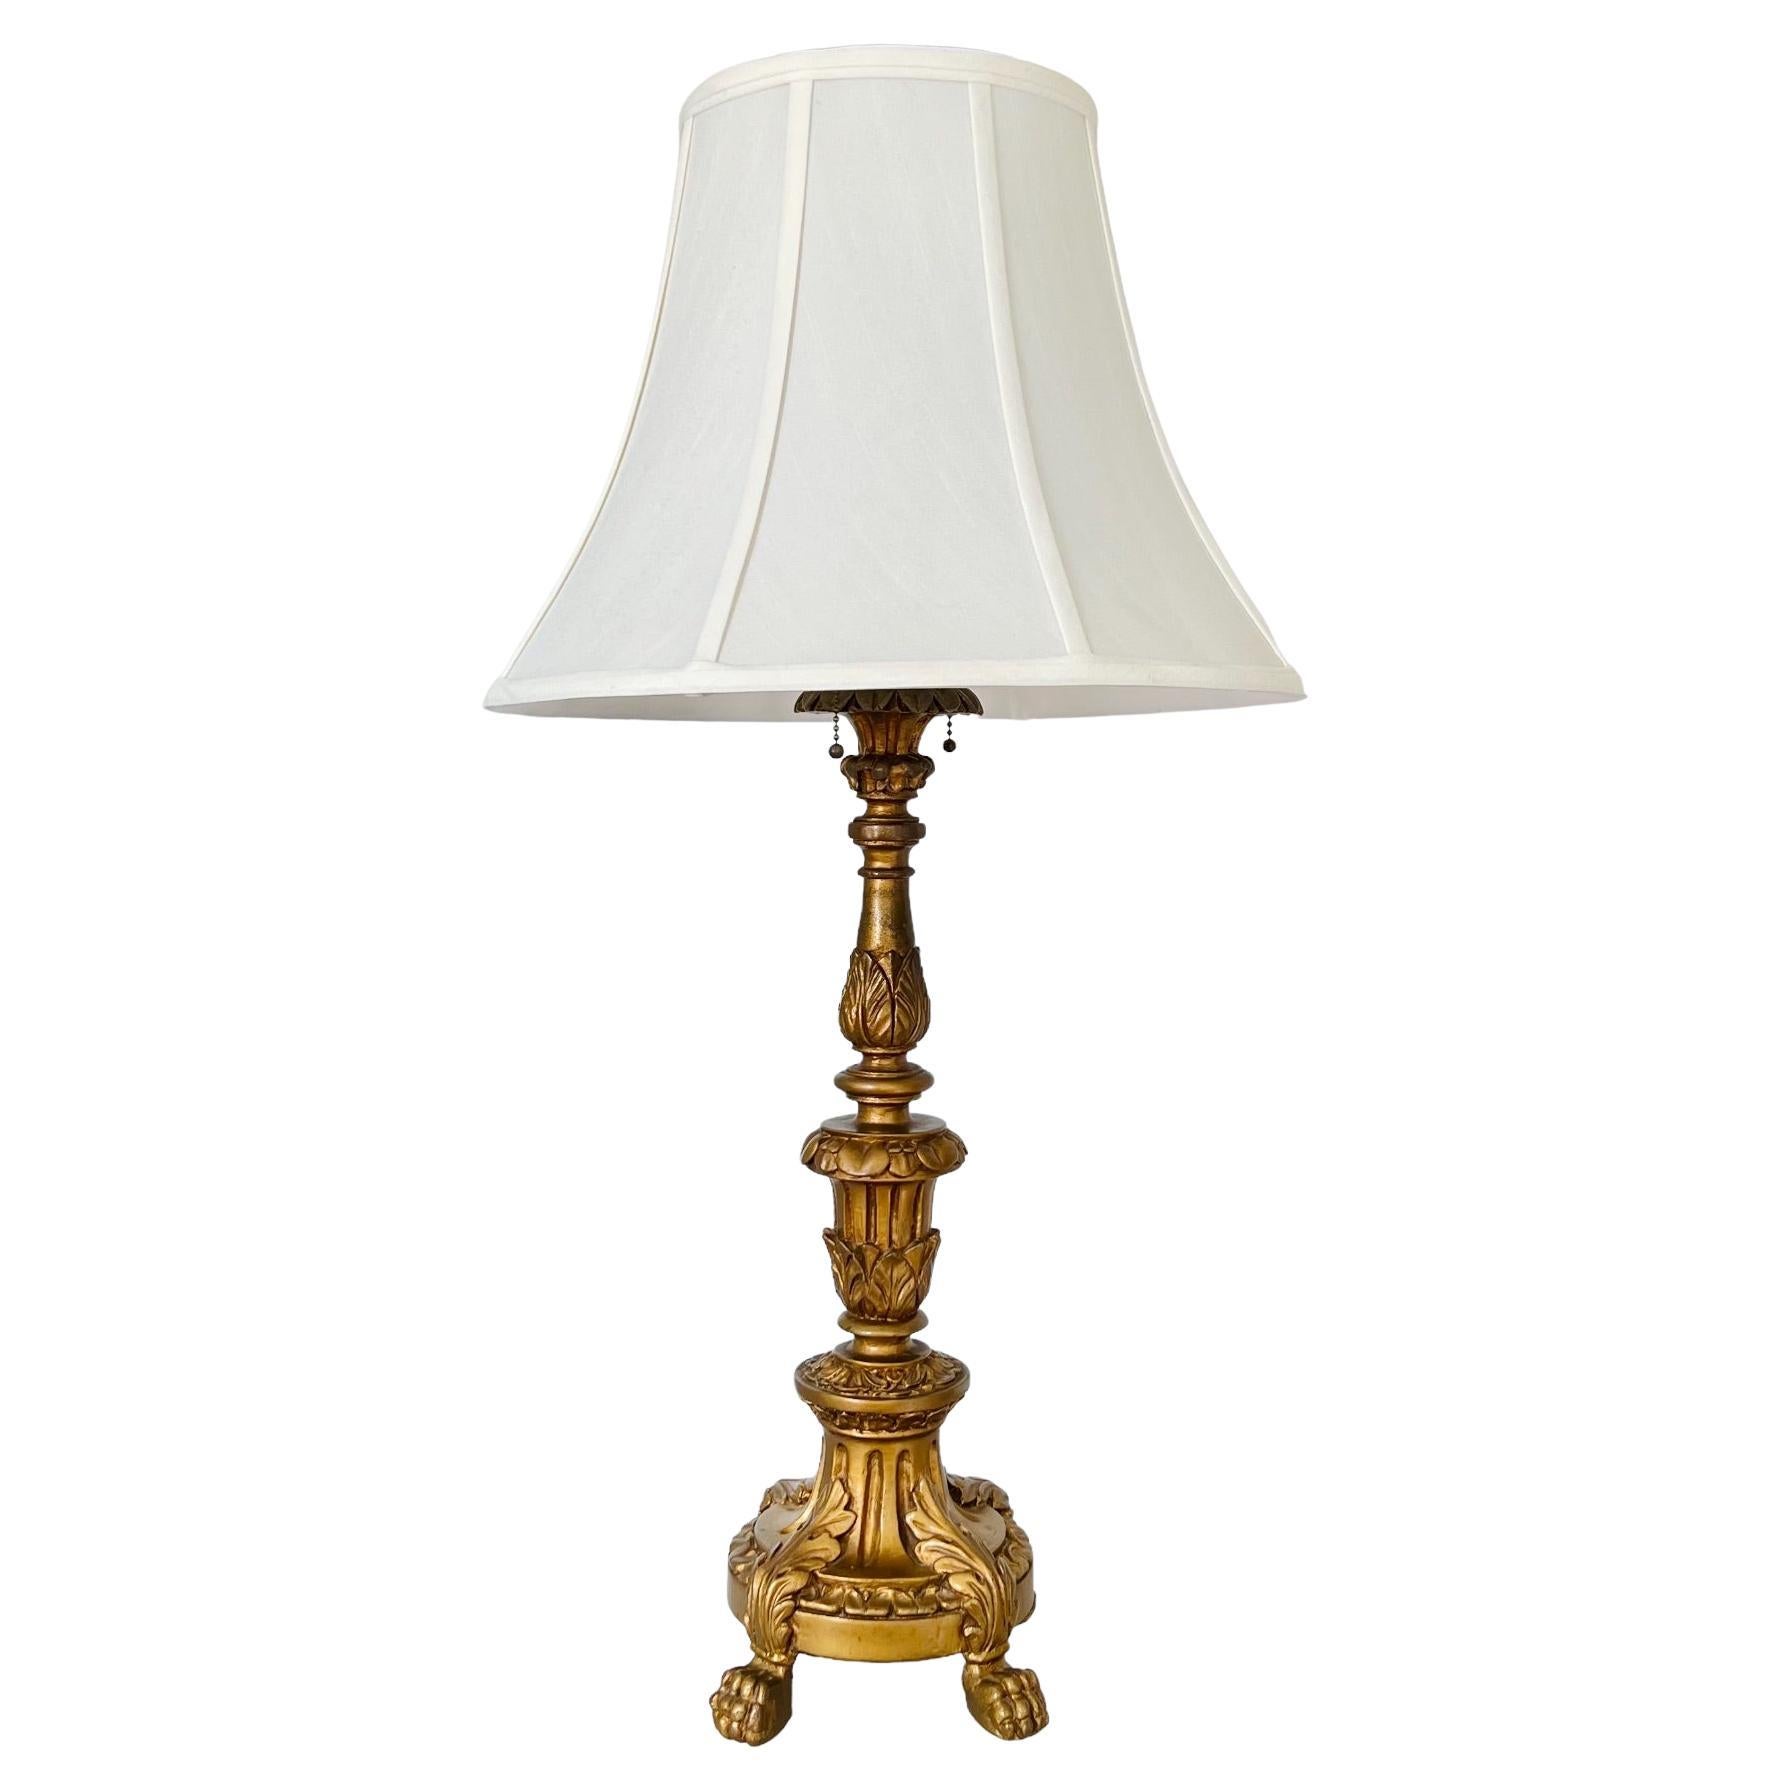 Early 20th Century French Empire Gilt Gesso Lamp For Sale